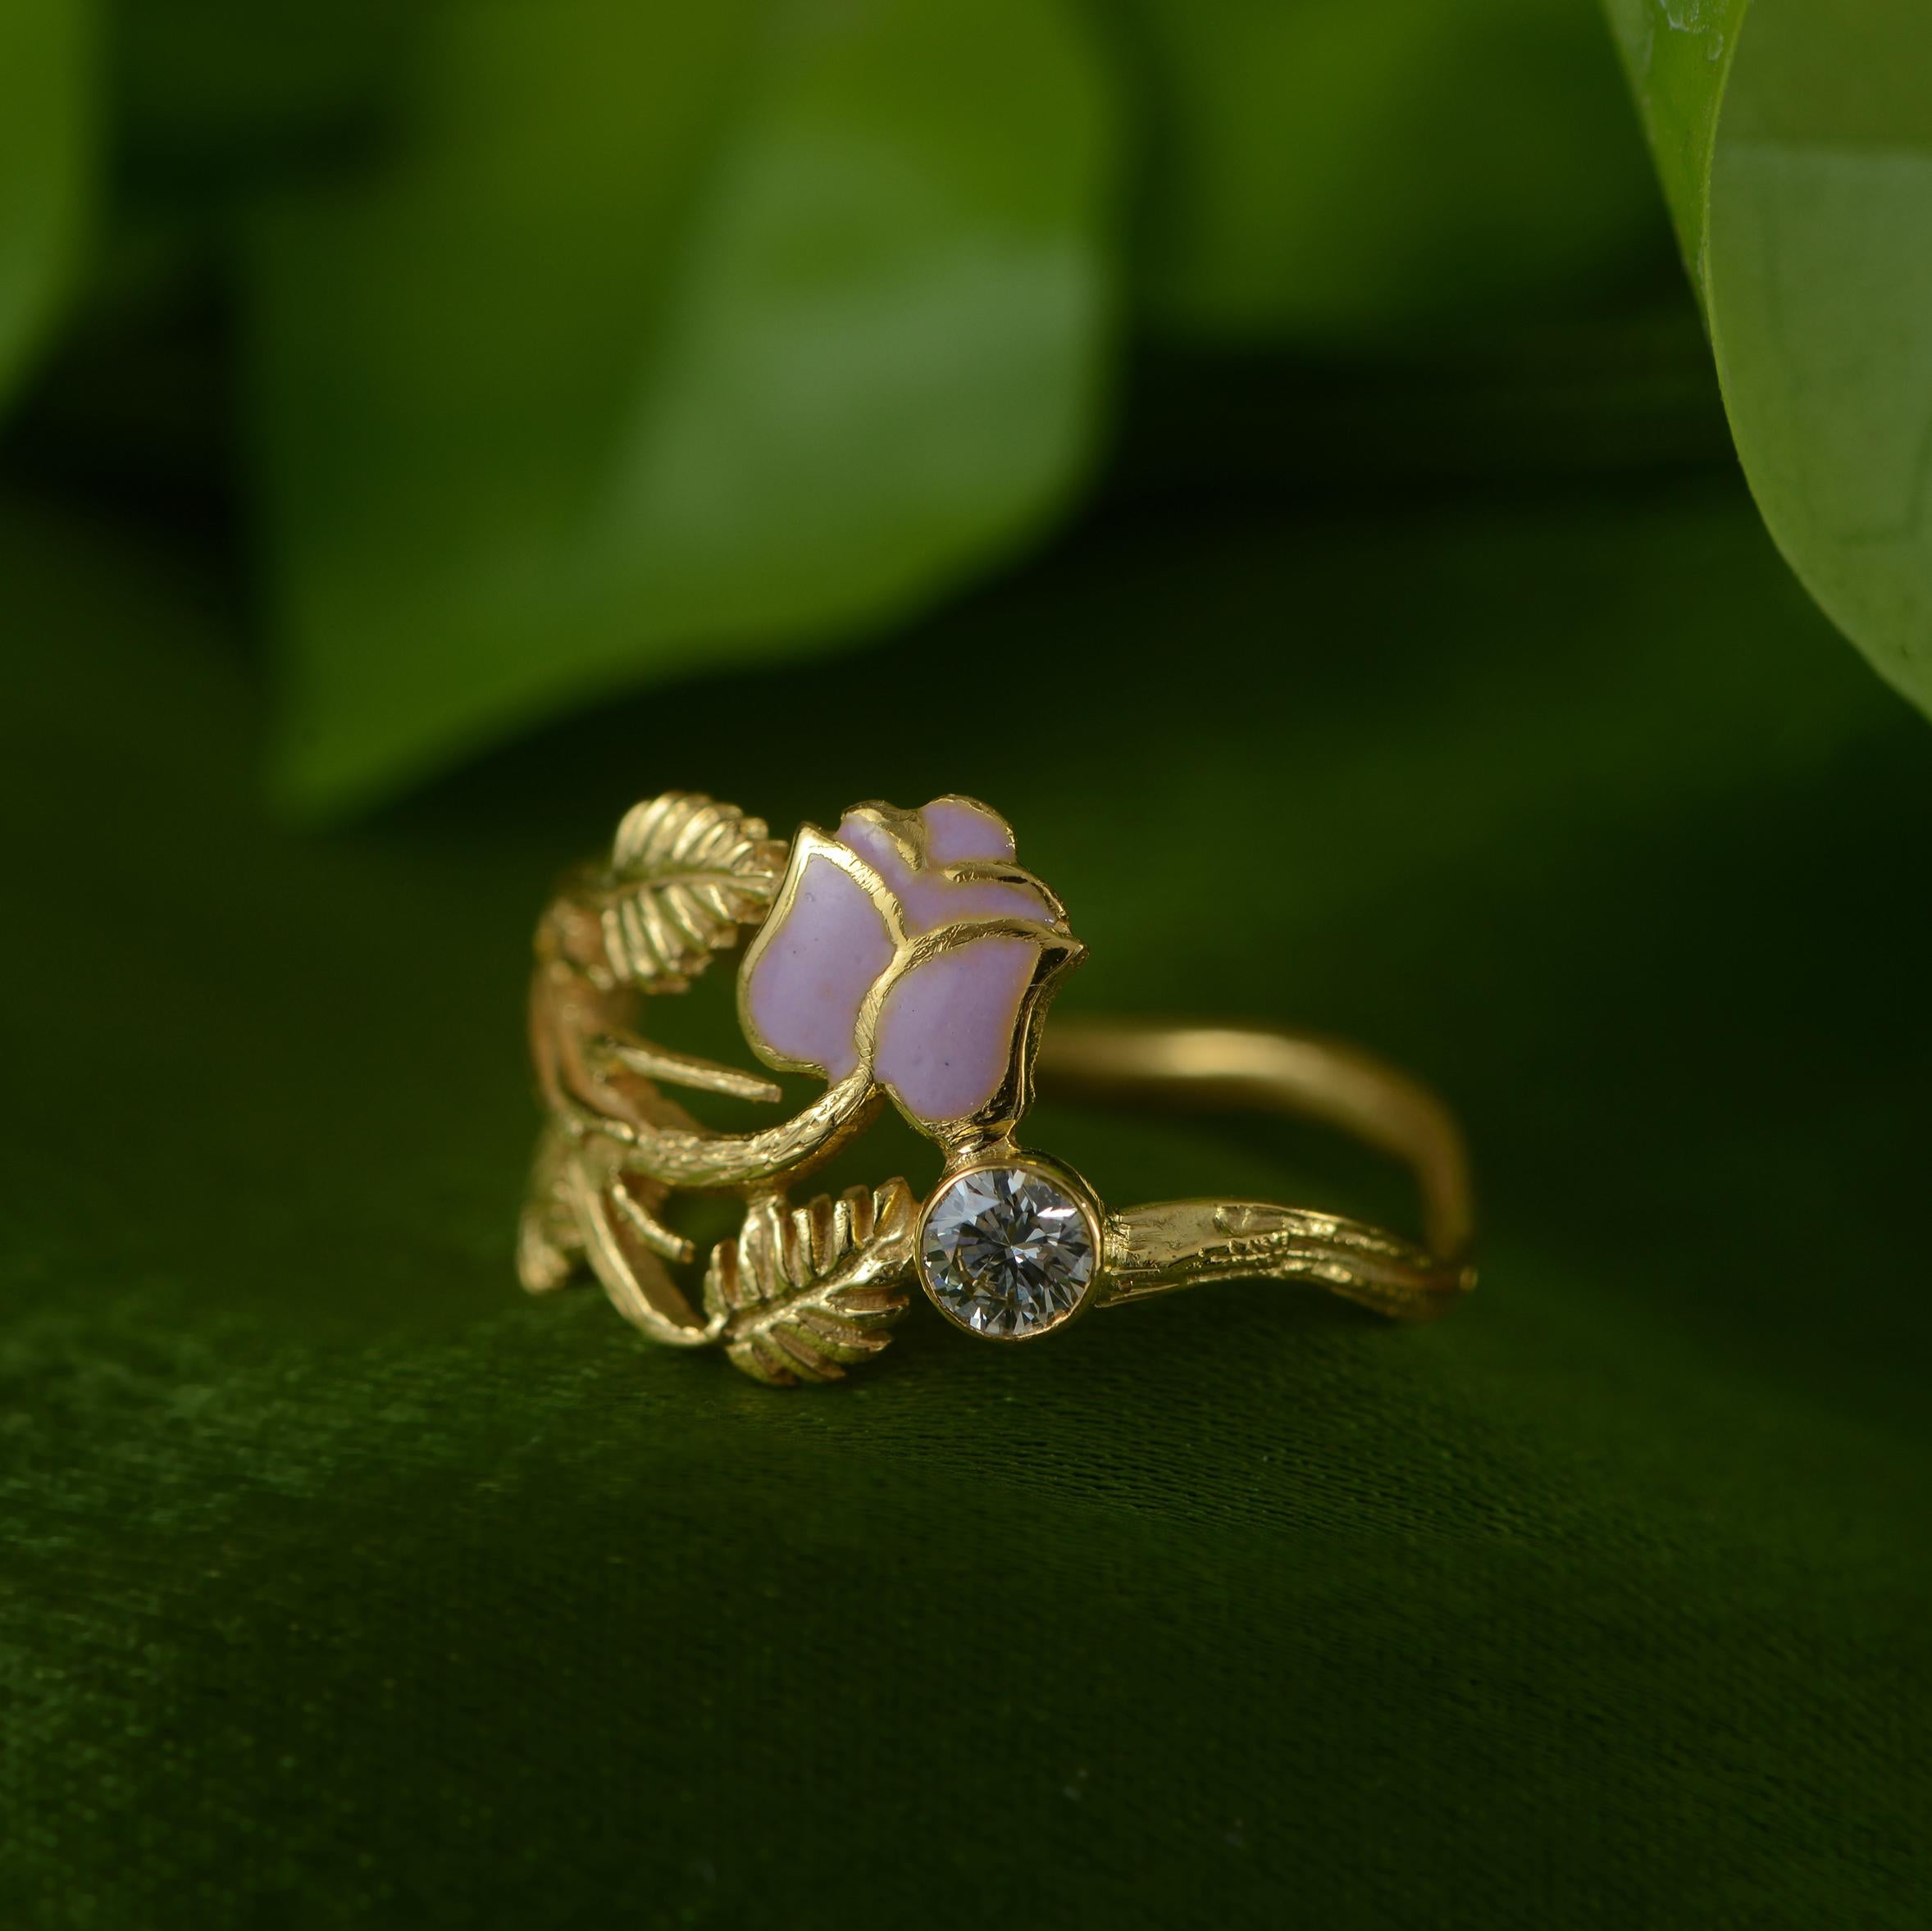 This is a lovely one-of-a-kind handmade  18k gold diamond and enamel flower ring. We have used the ancient art of enamel in this ring and created a beautiful rose, which is flanked by a full cut diamond. The ring also has exquisite hand-engraving